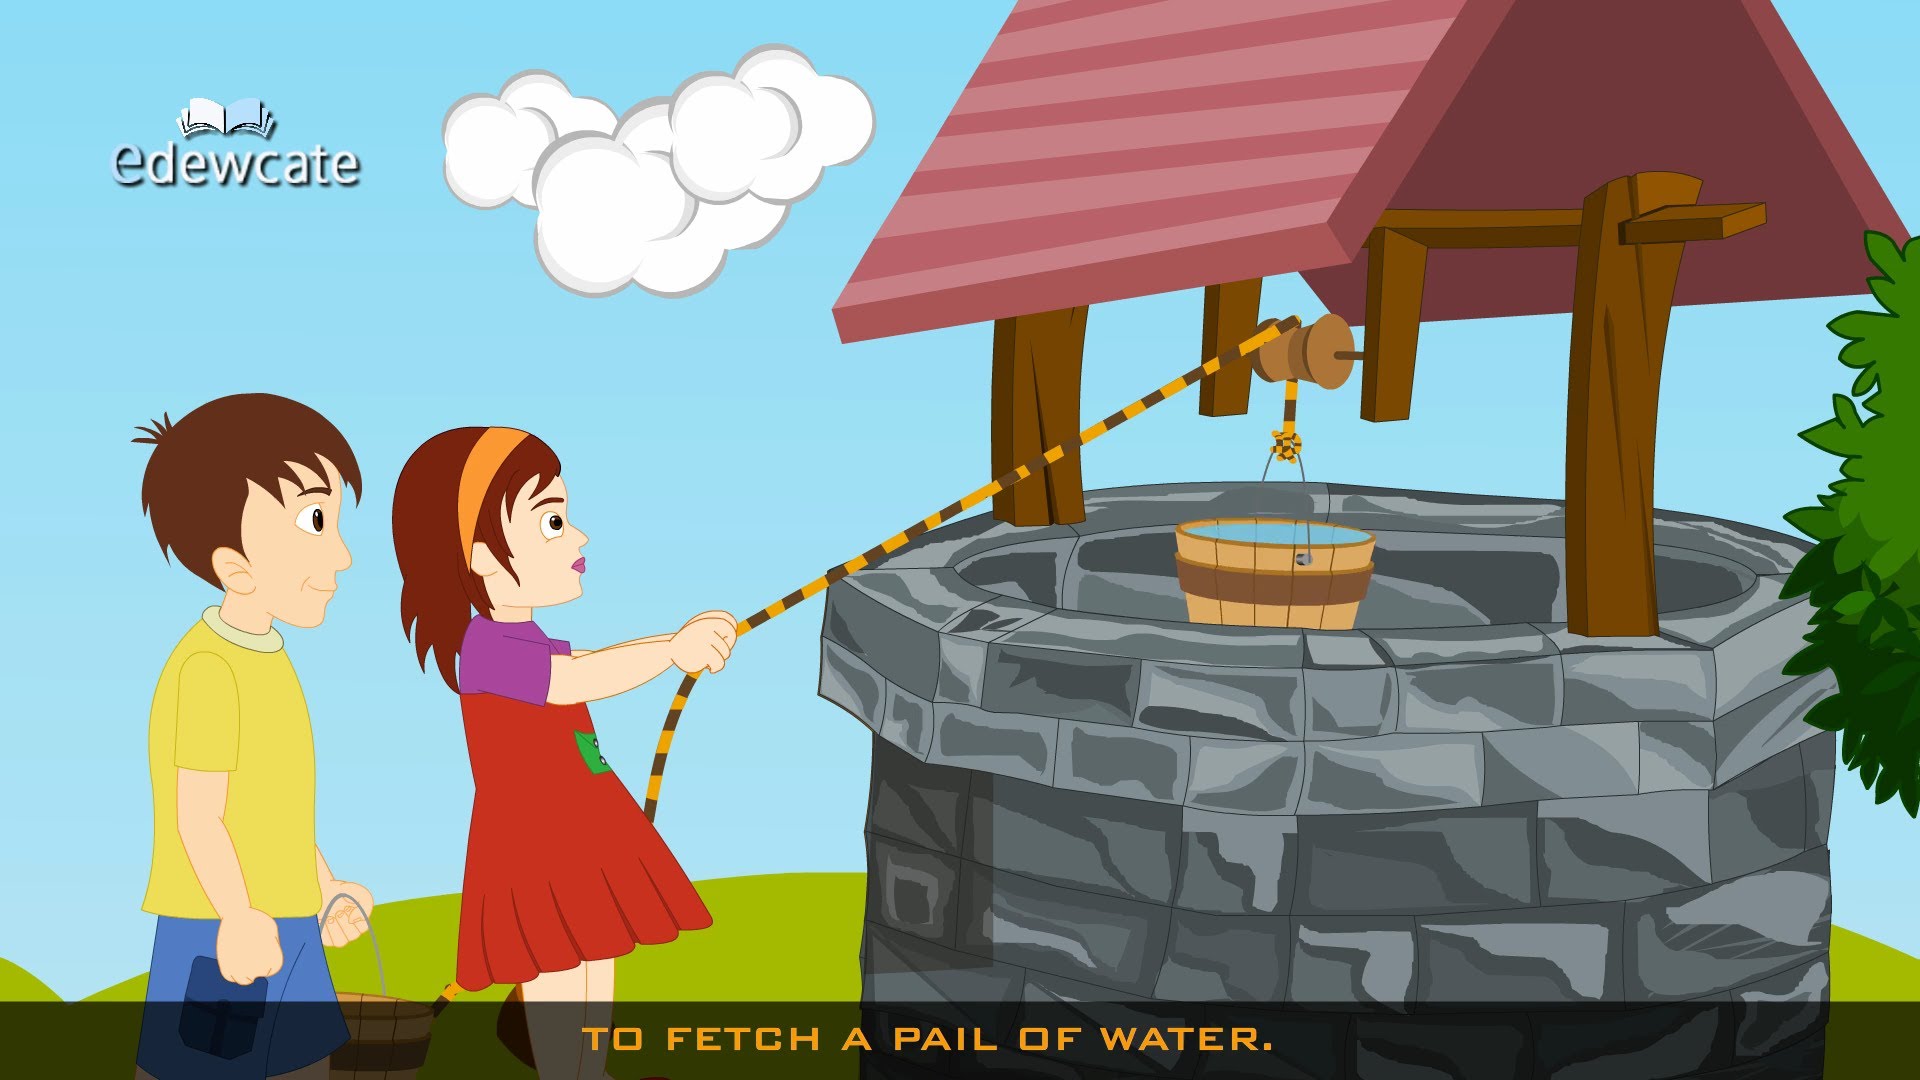 Free Jack And Jill, Download Free Clip Art, Free Clip Art on